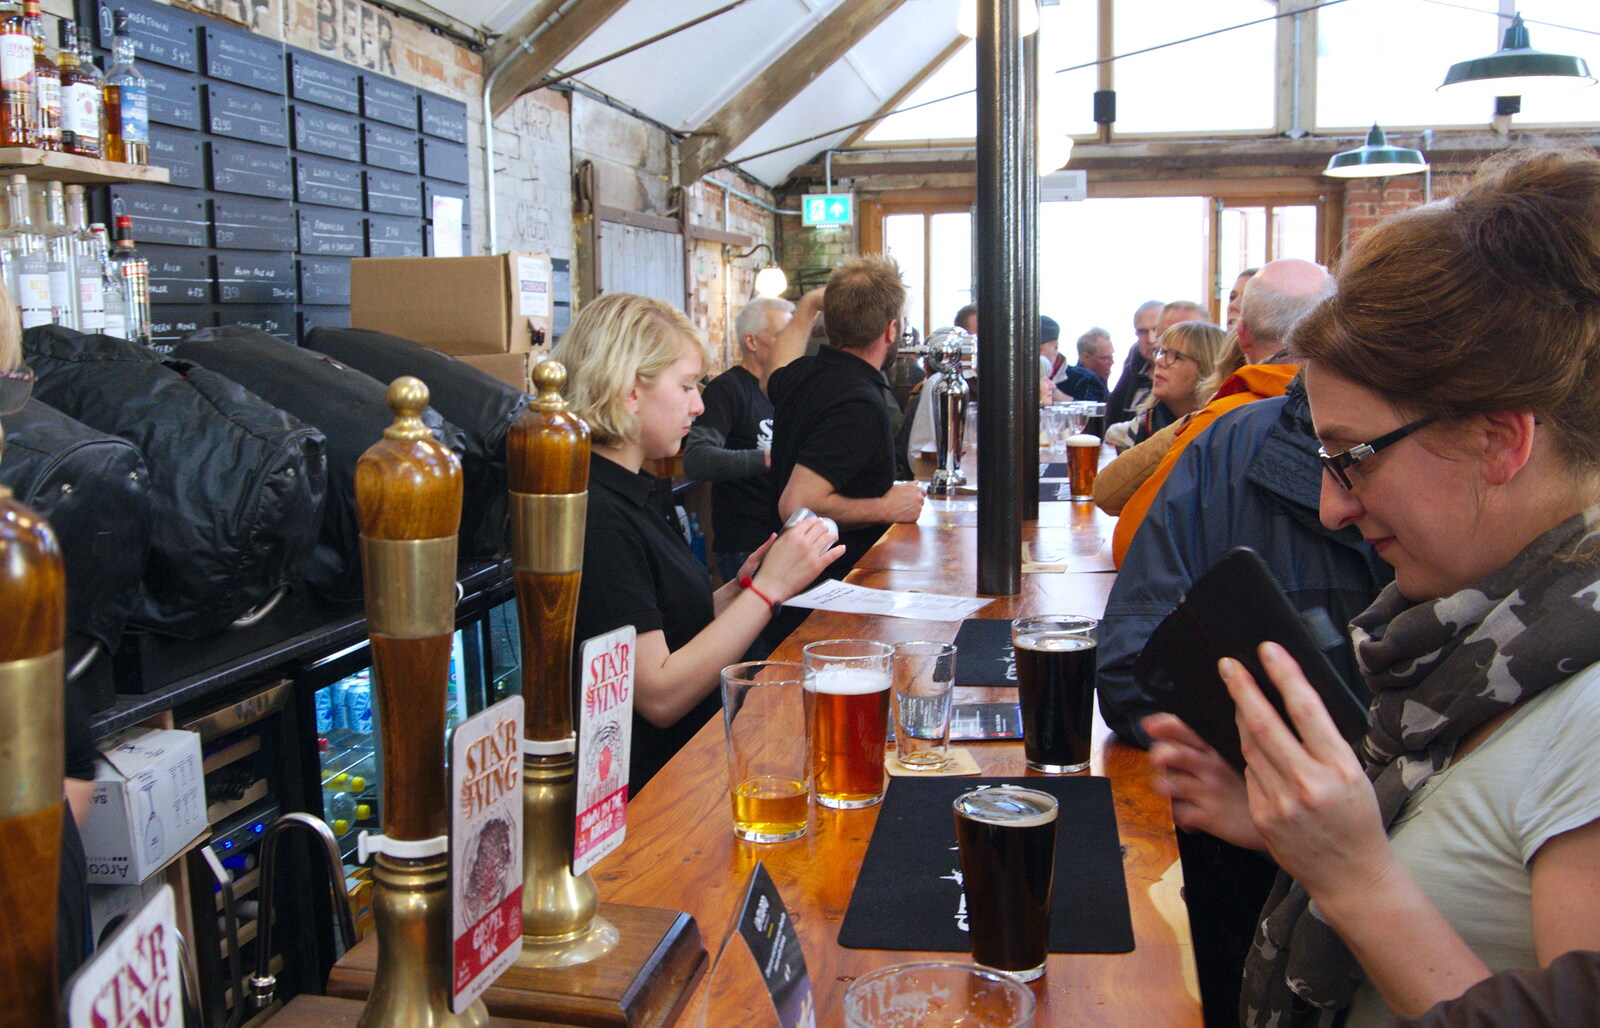 Suey's at the bar from The Opening of Star Wing Brewery's Tap Room, Redgrave, Suffolk - 4th May 2019